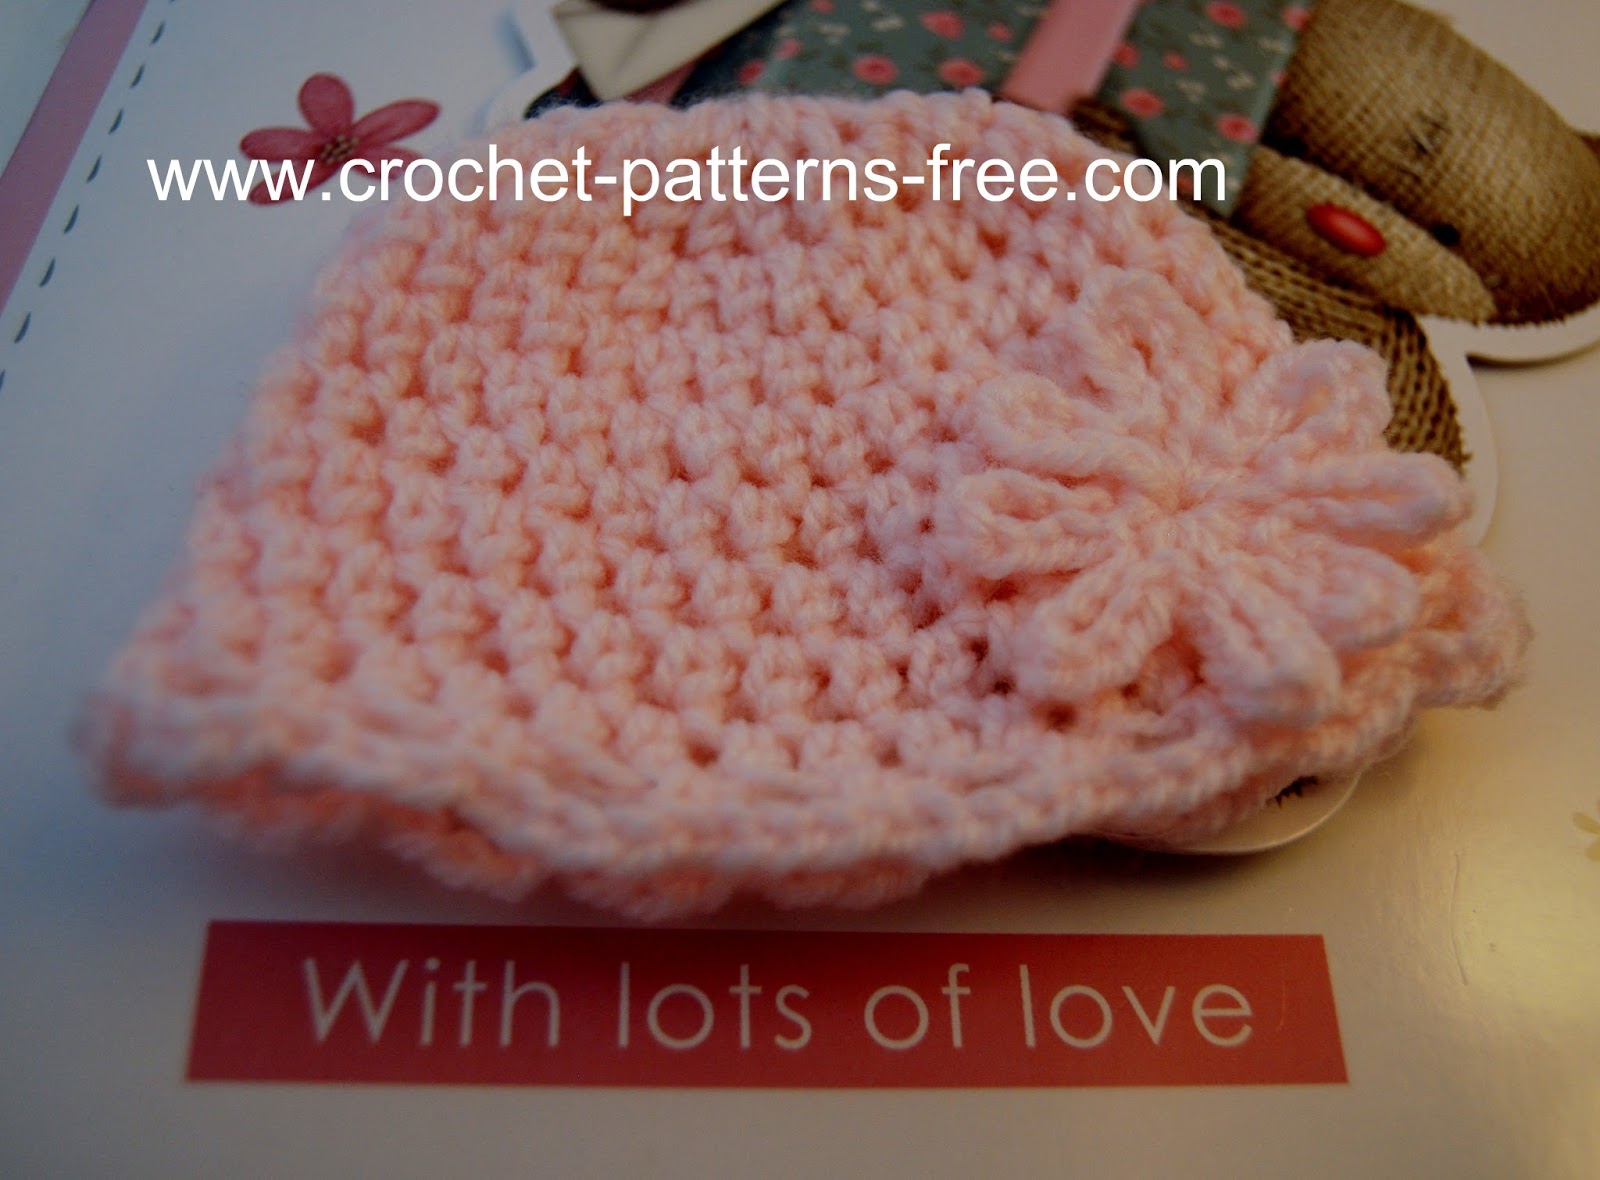 Free Patterns - Crochet Preemie - TLC for Angels вЂ“ Free knit and